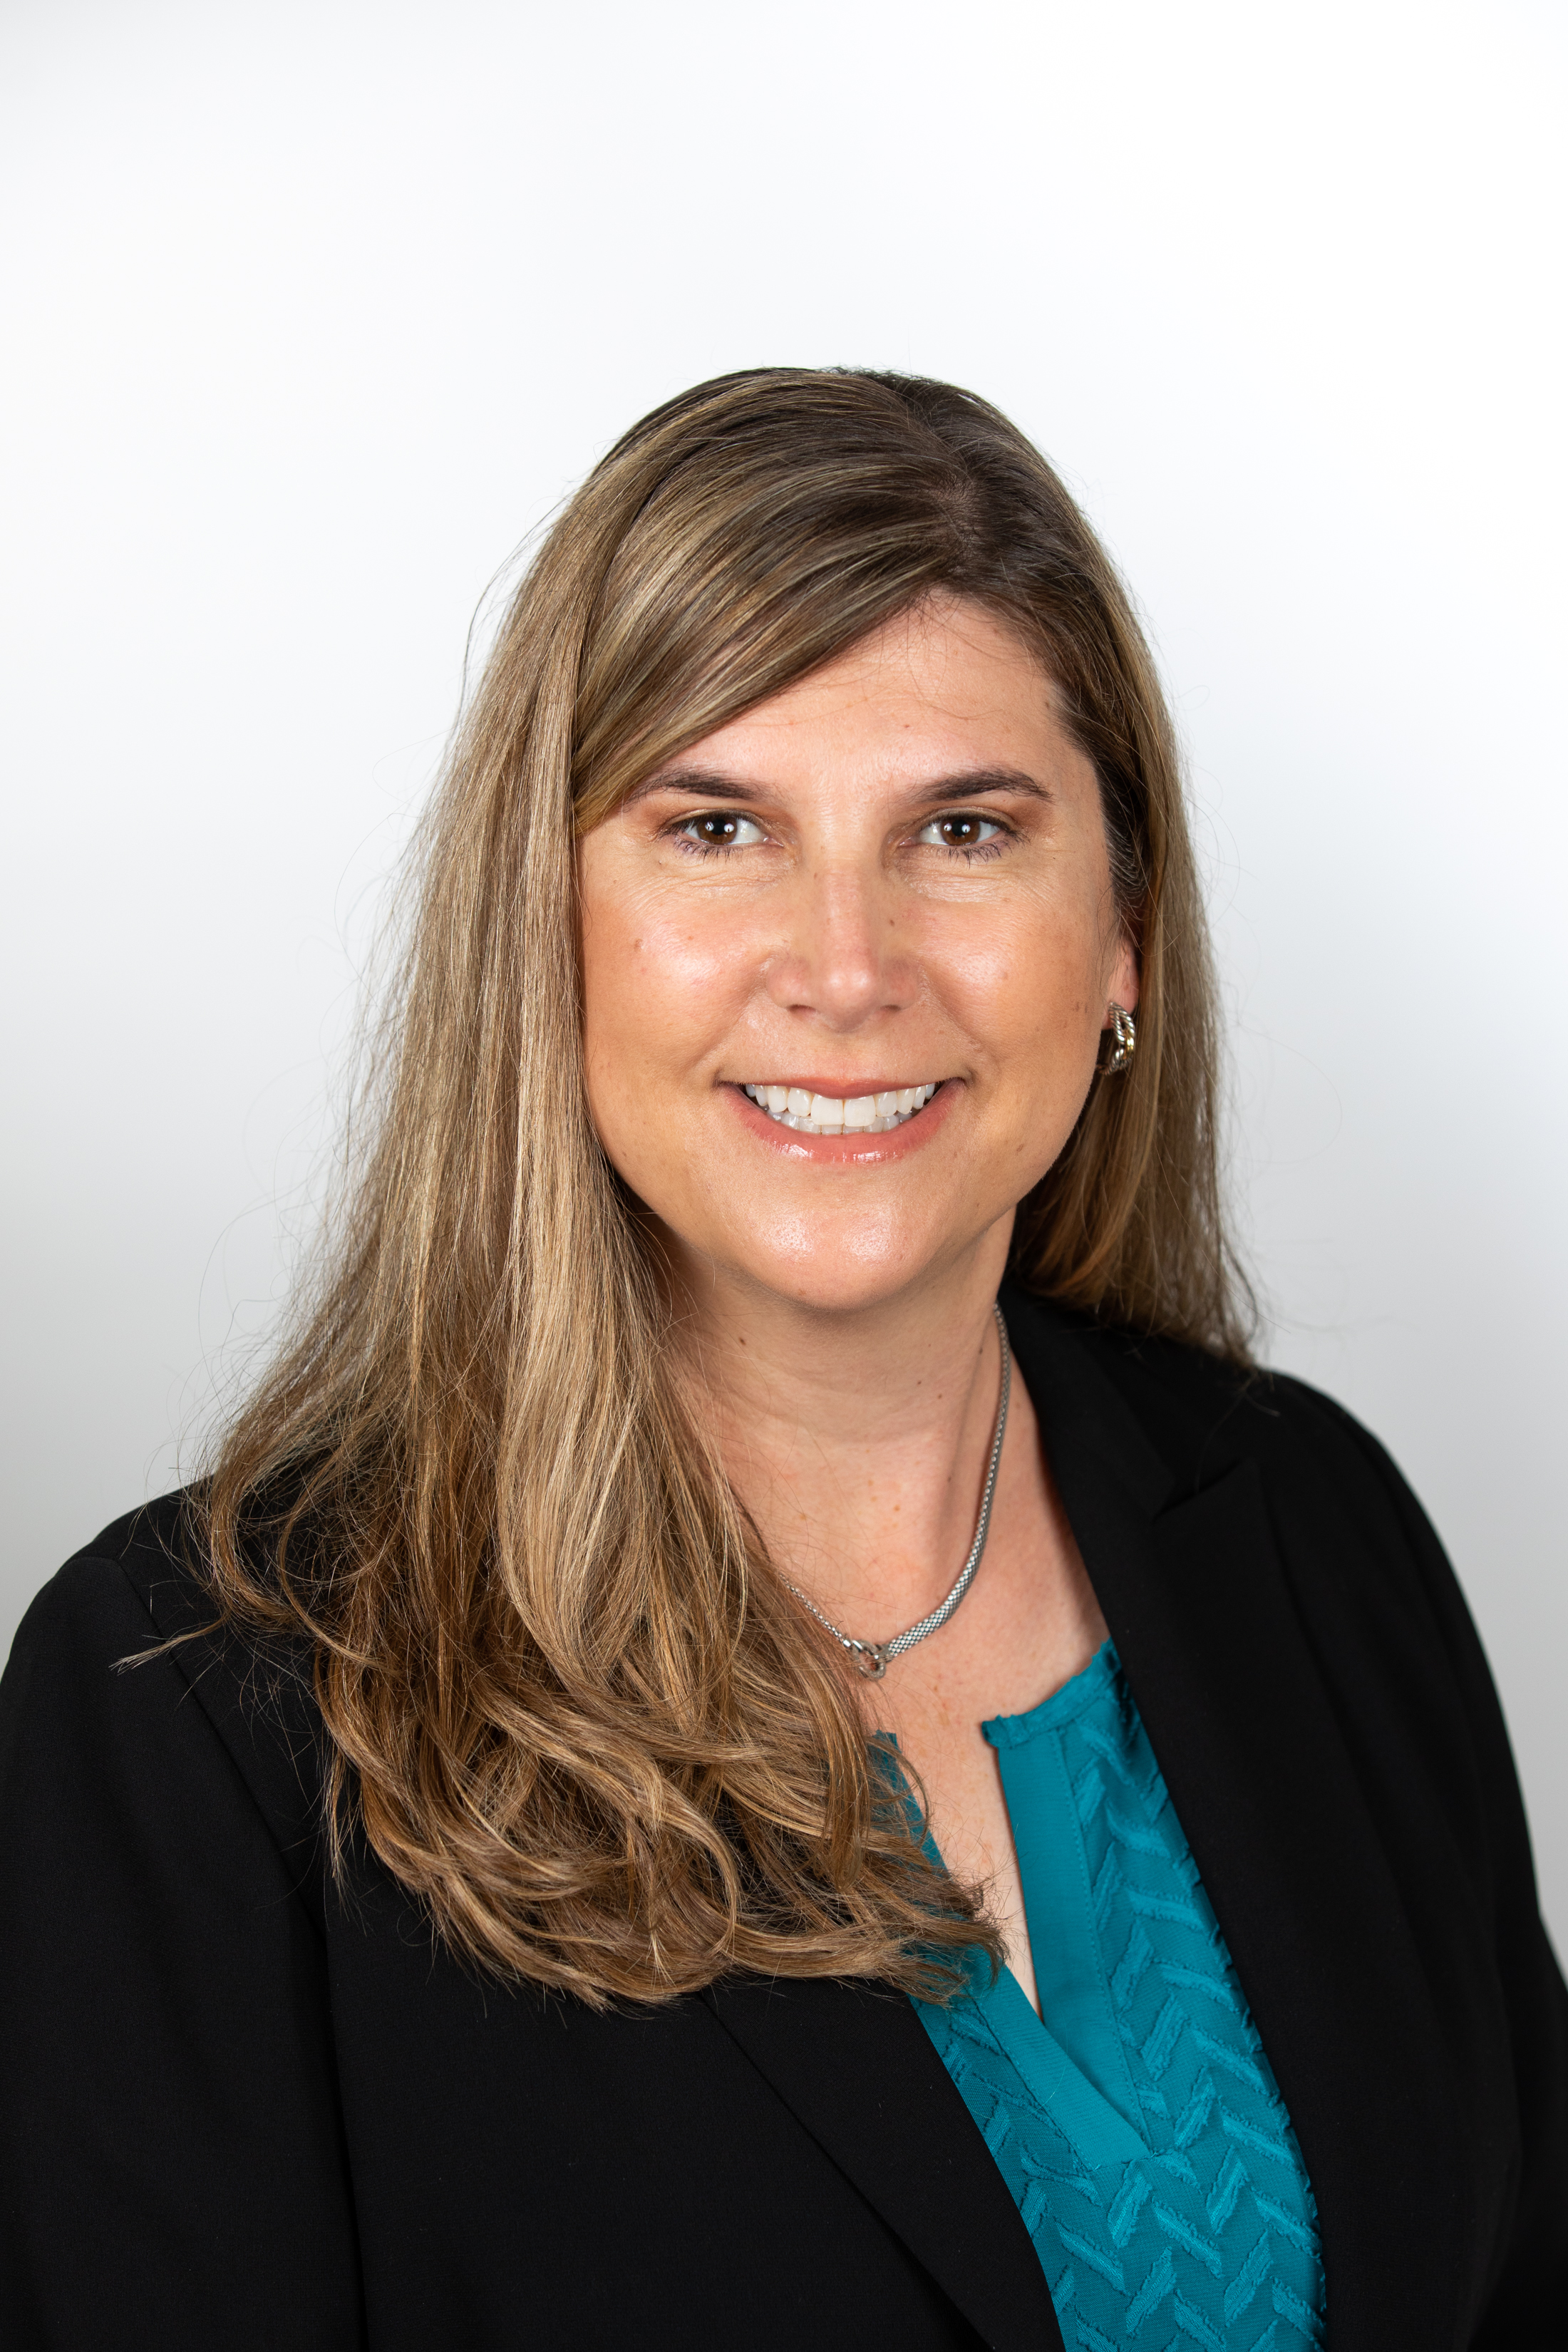 Professional headshot photo of Dr. Danielle Campagne